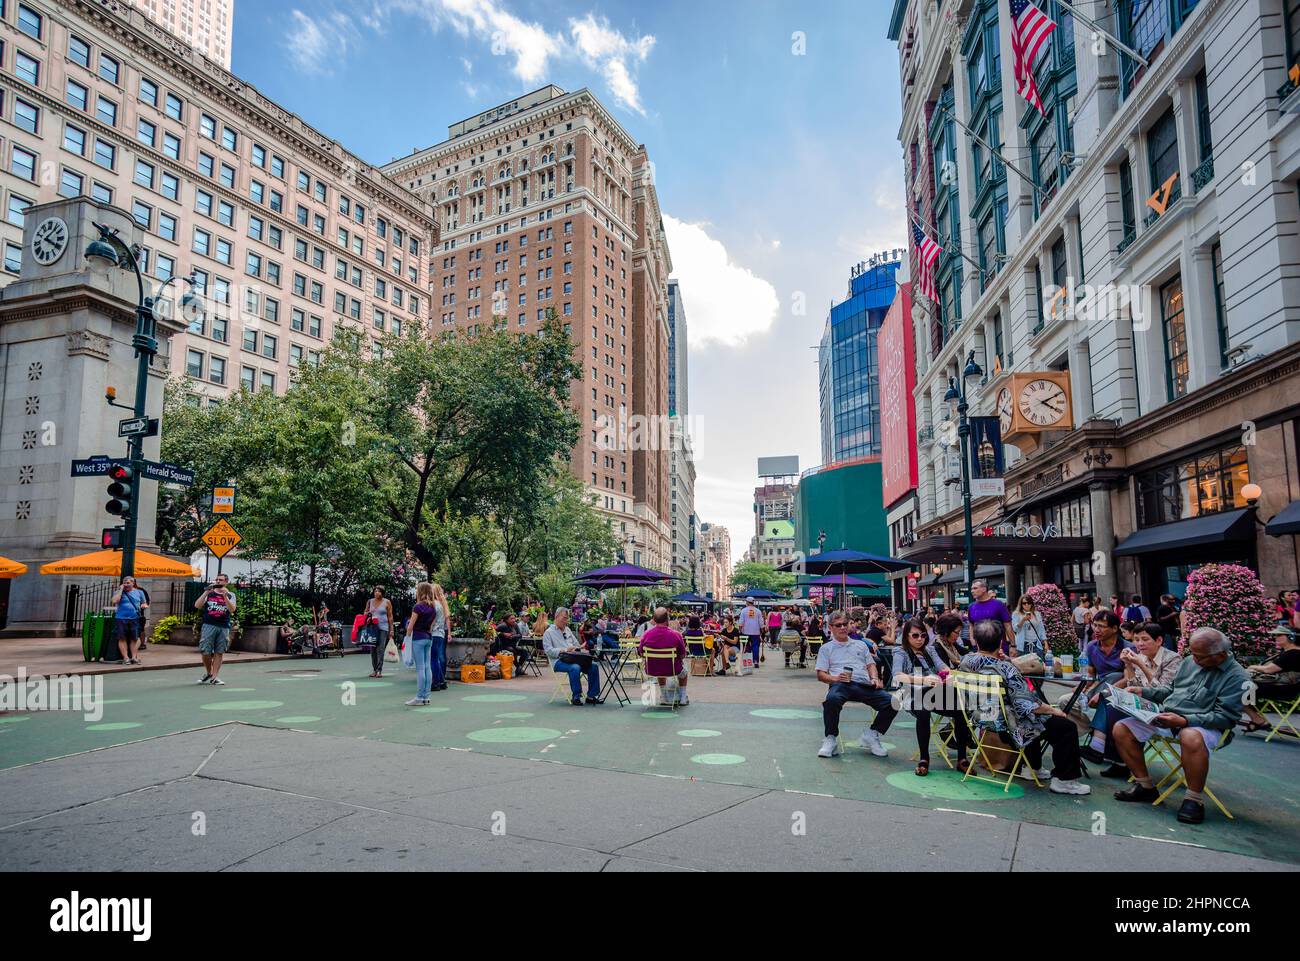 Herald Square in midtown Manhattan, NY, with incidental people enjoying sitting in sidewalk cafes. Stock Photo